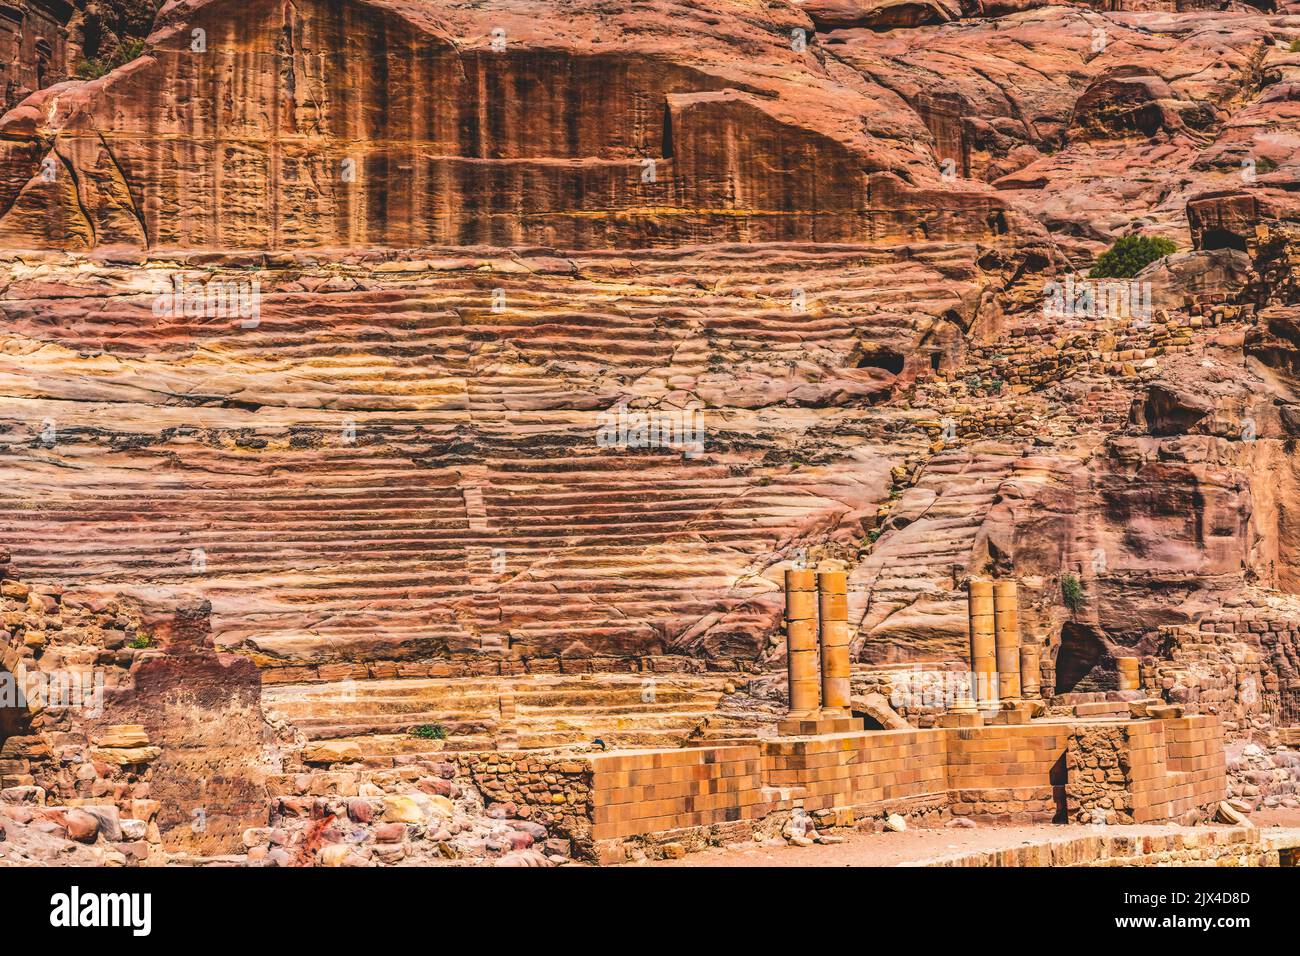 Red Carved Amphitheater Morrning Petra Jordan Built by Nabataens in 100 AD Finished by Romans Seats up to 7,000 people. Stock Photo